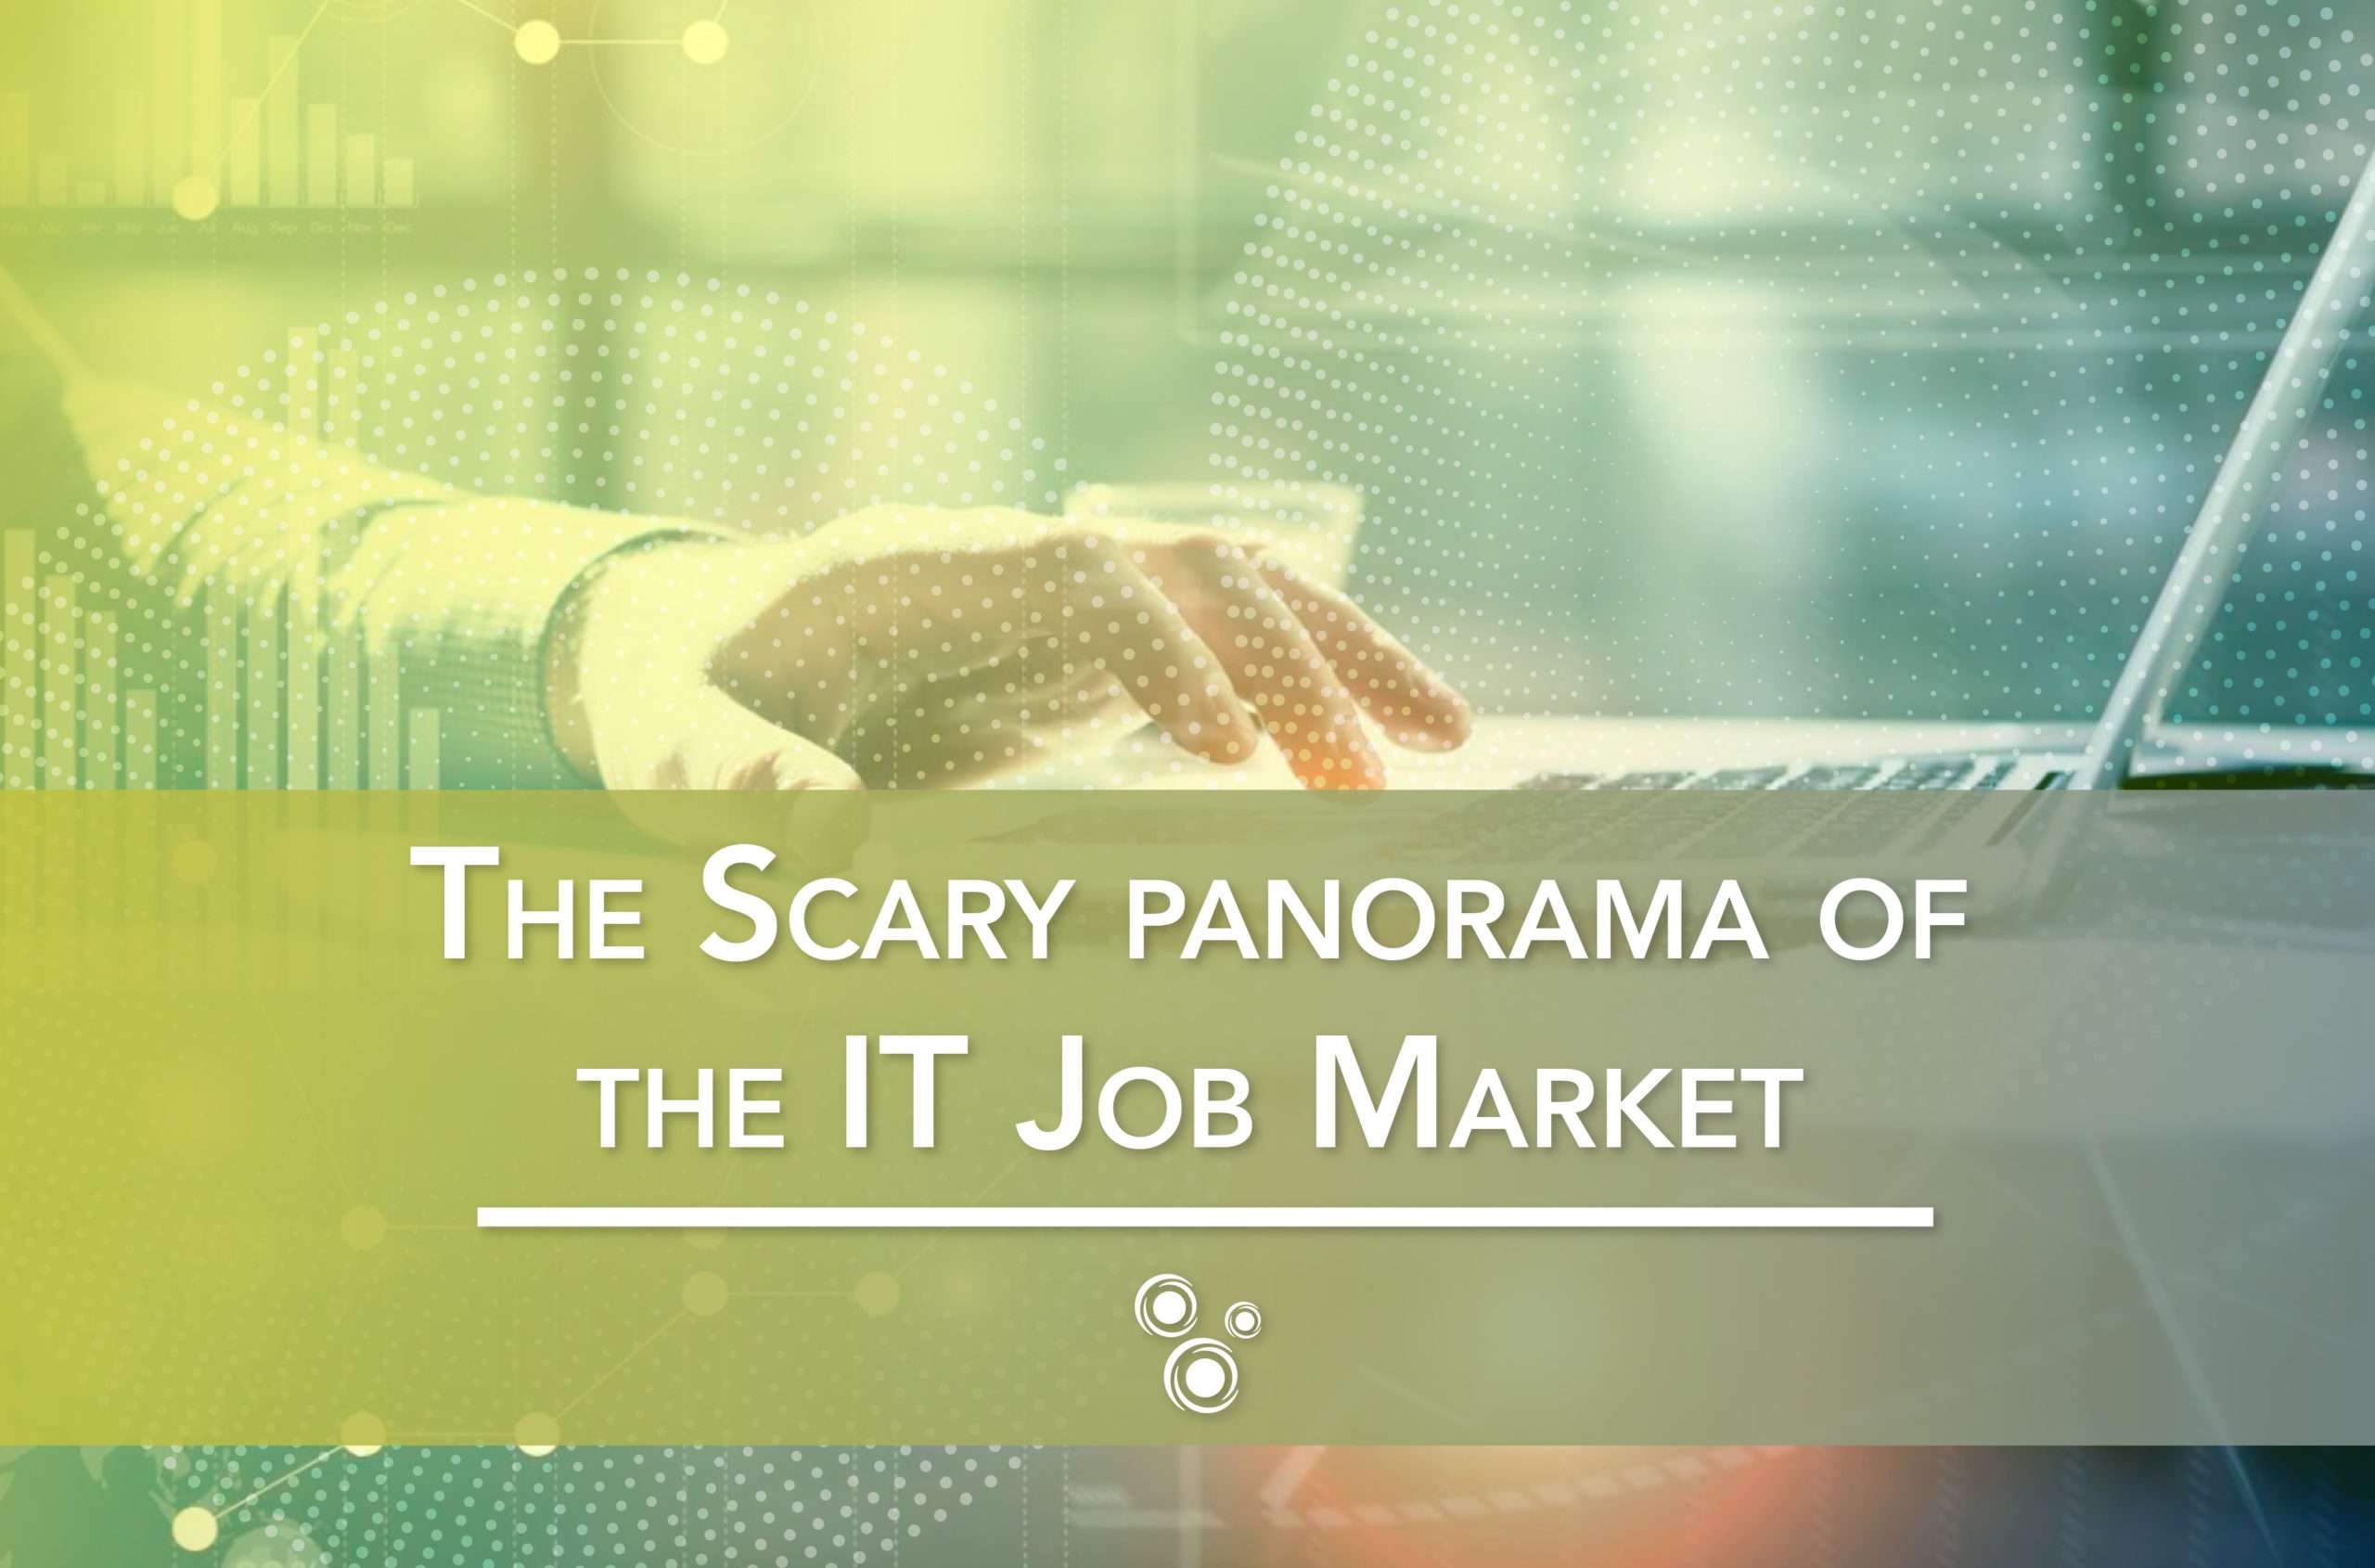 The Scary panorama of the IT Job Market